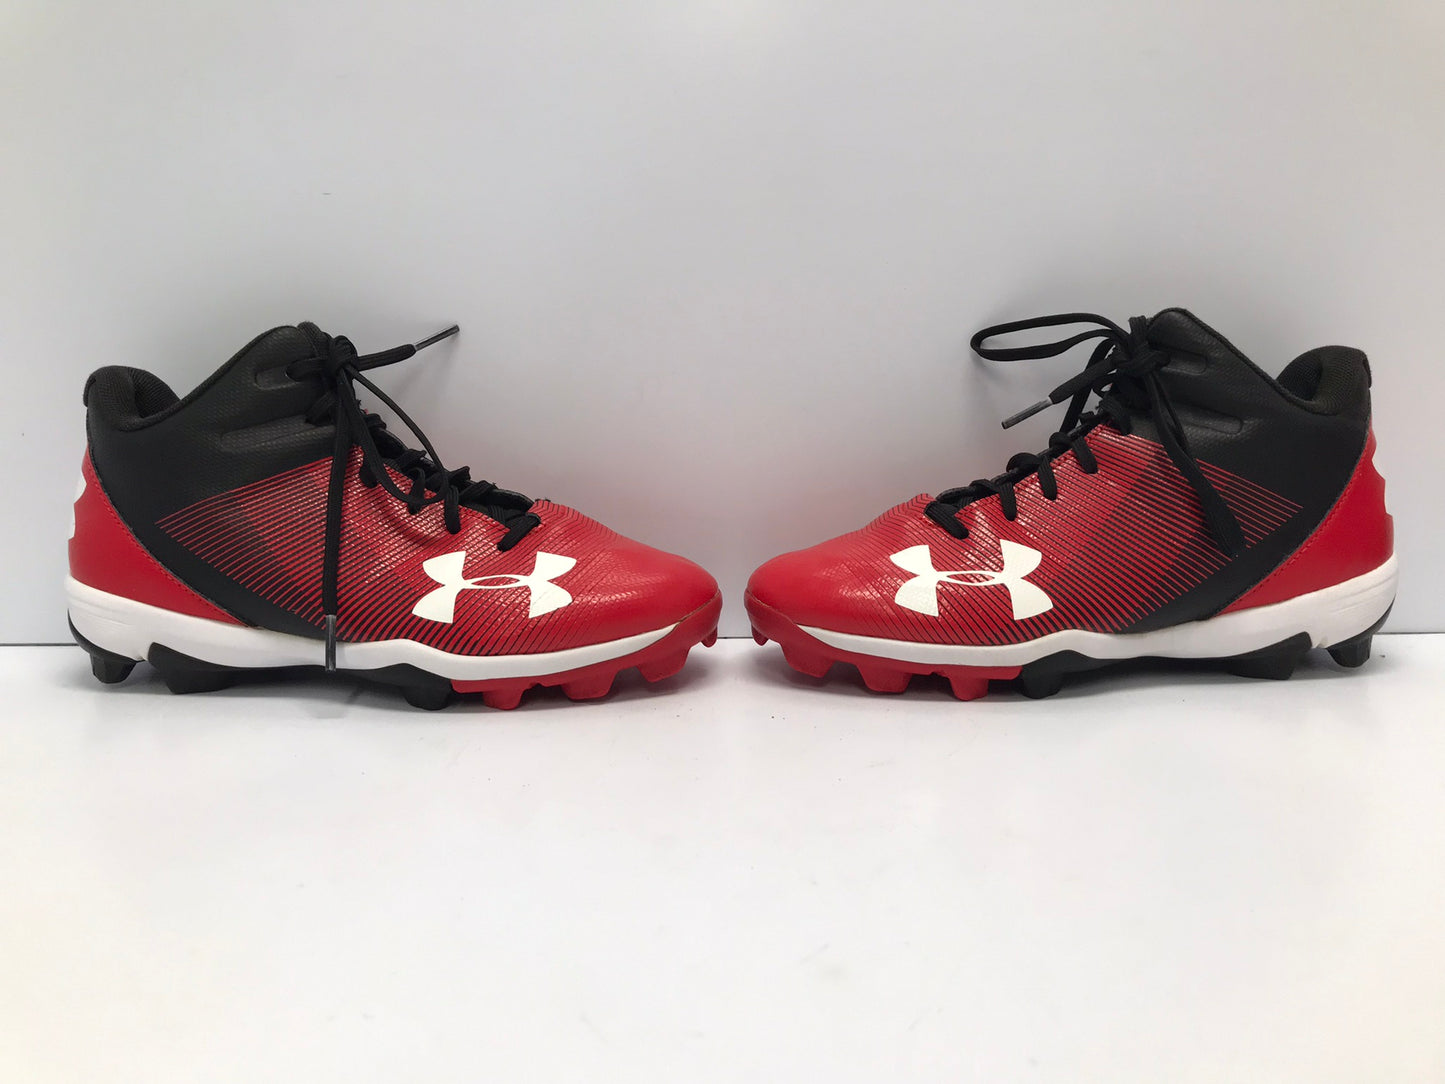 Baseball Shoes Cleats Child Size 4 Under Armour High Top Red Black Excellent